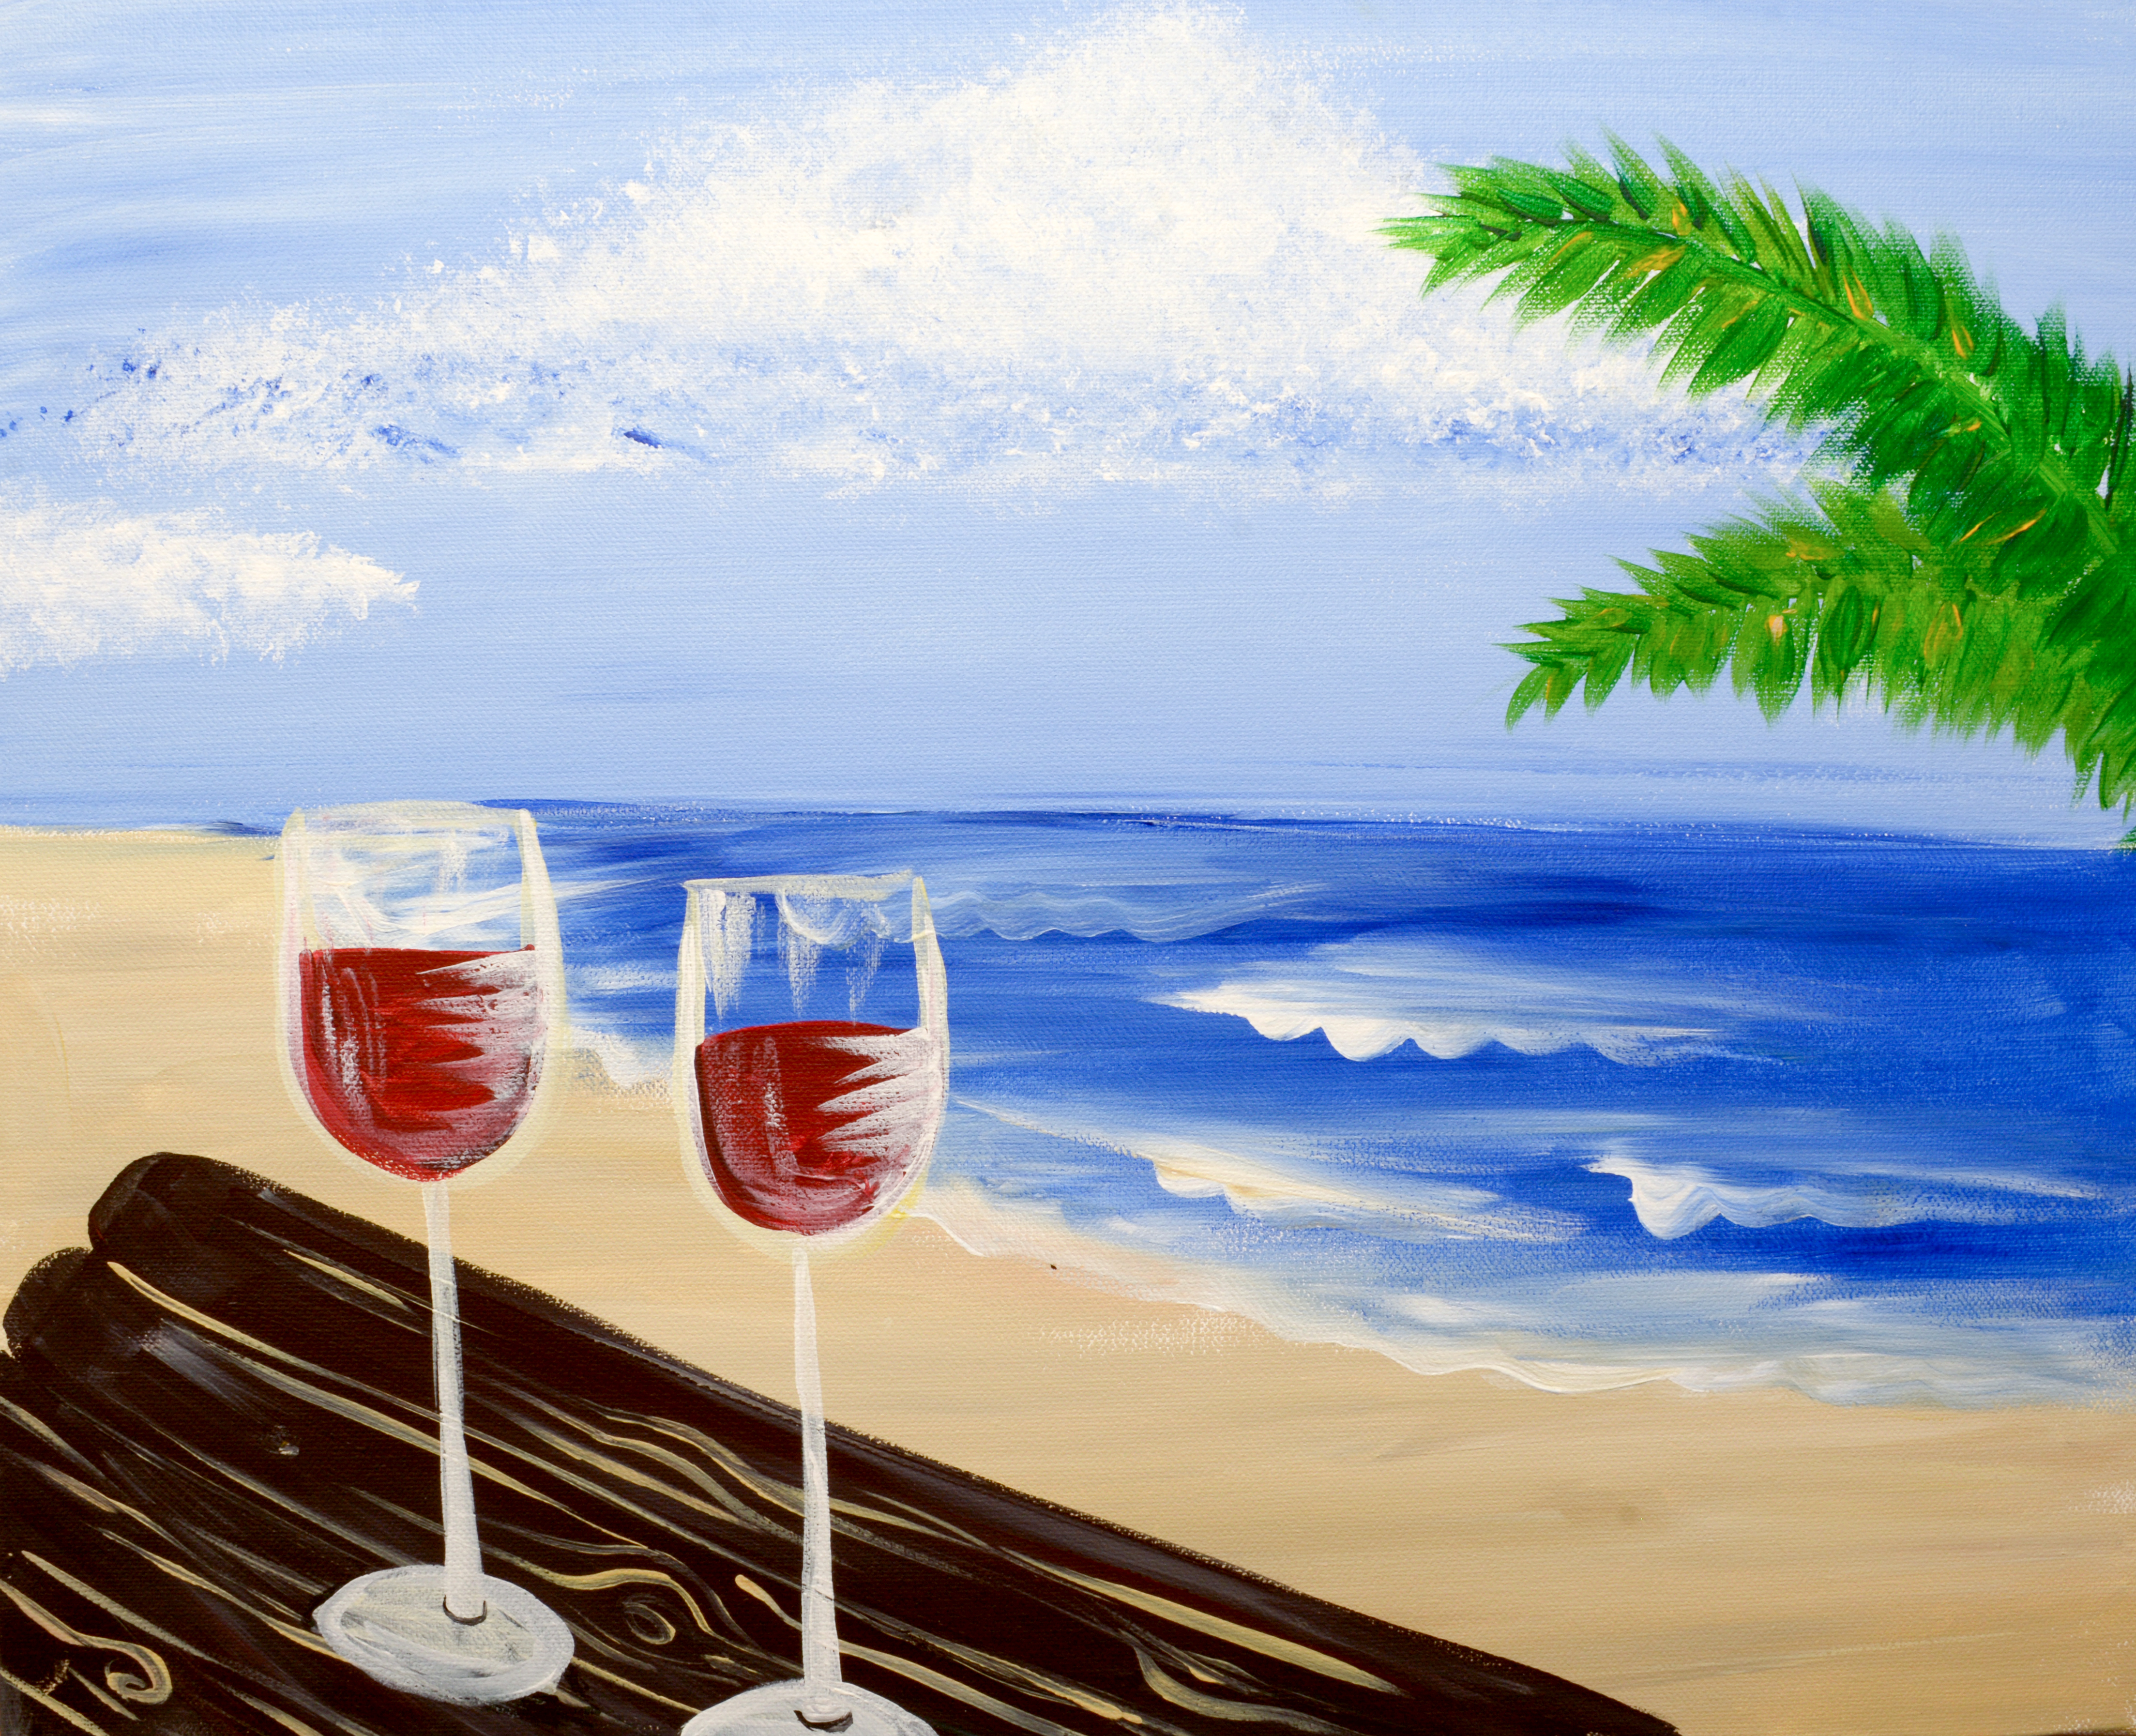 South Beach View – Solshinearts